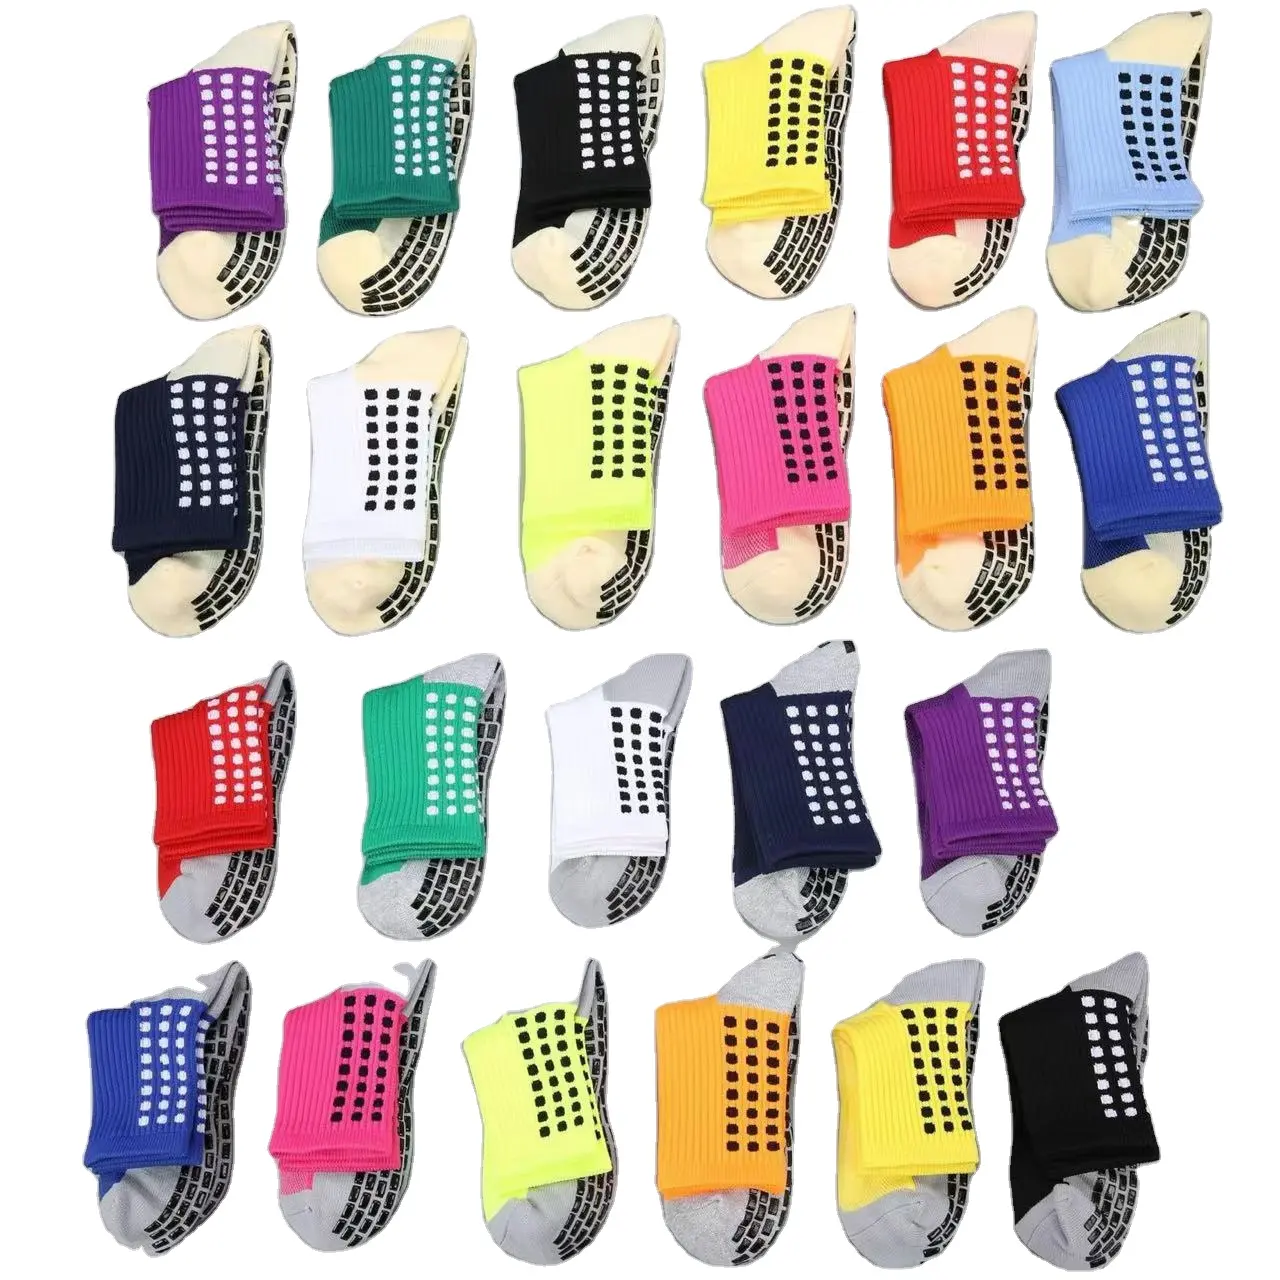 New material Sports colorful anti slip soccer athletic football grip 39-45size socks 70% acrylic 25% polyester 5% spandex 61g